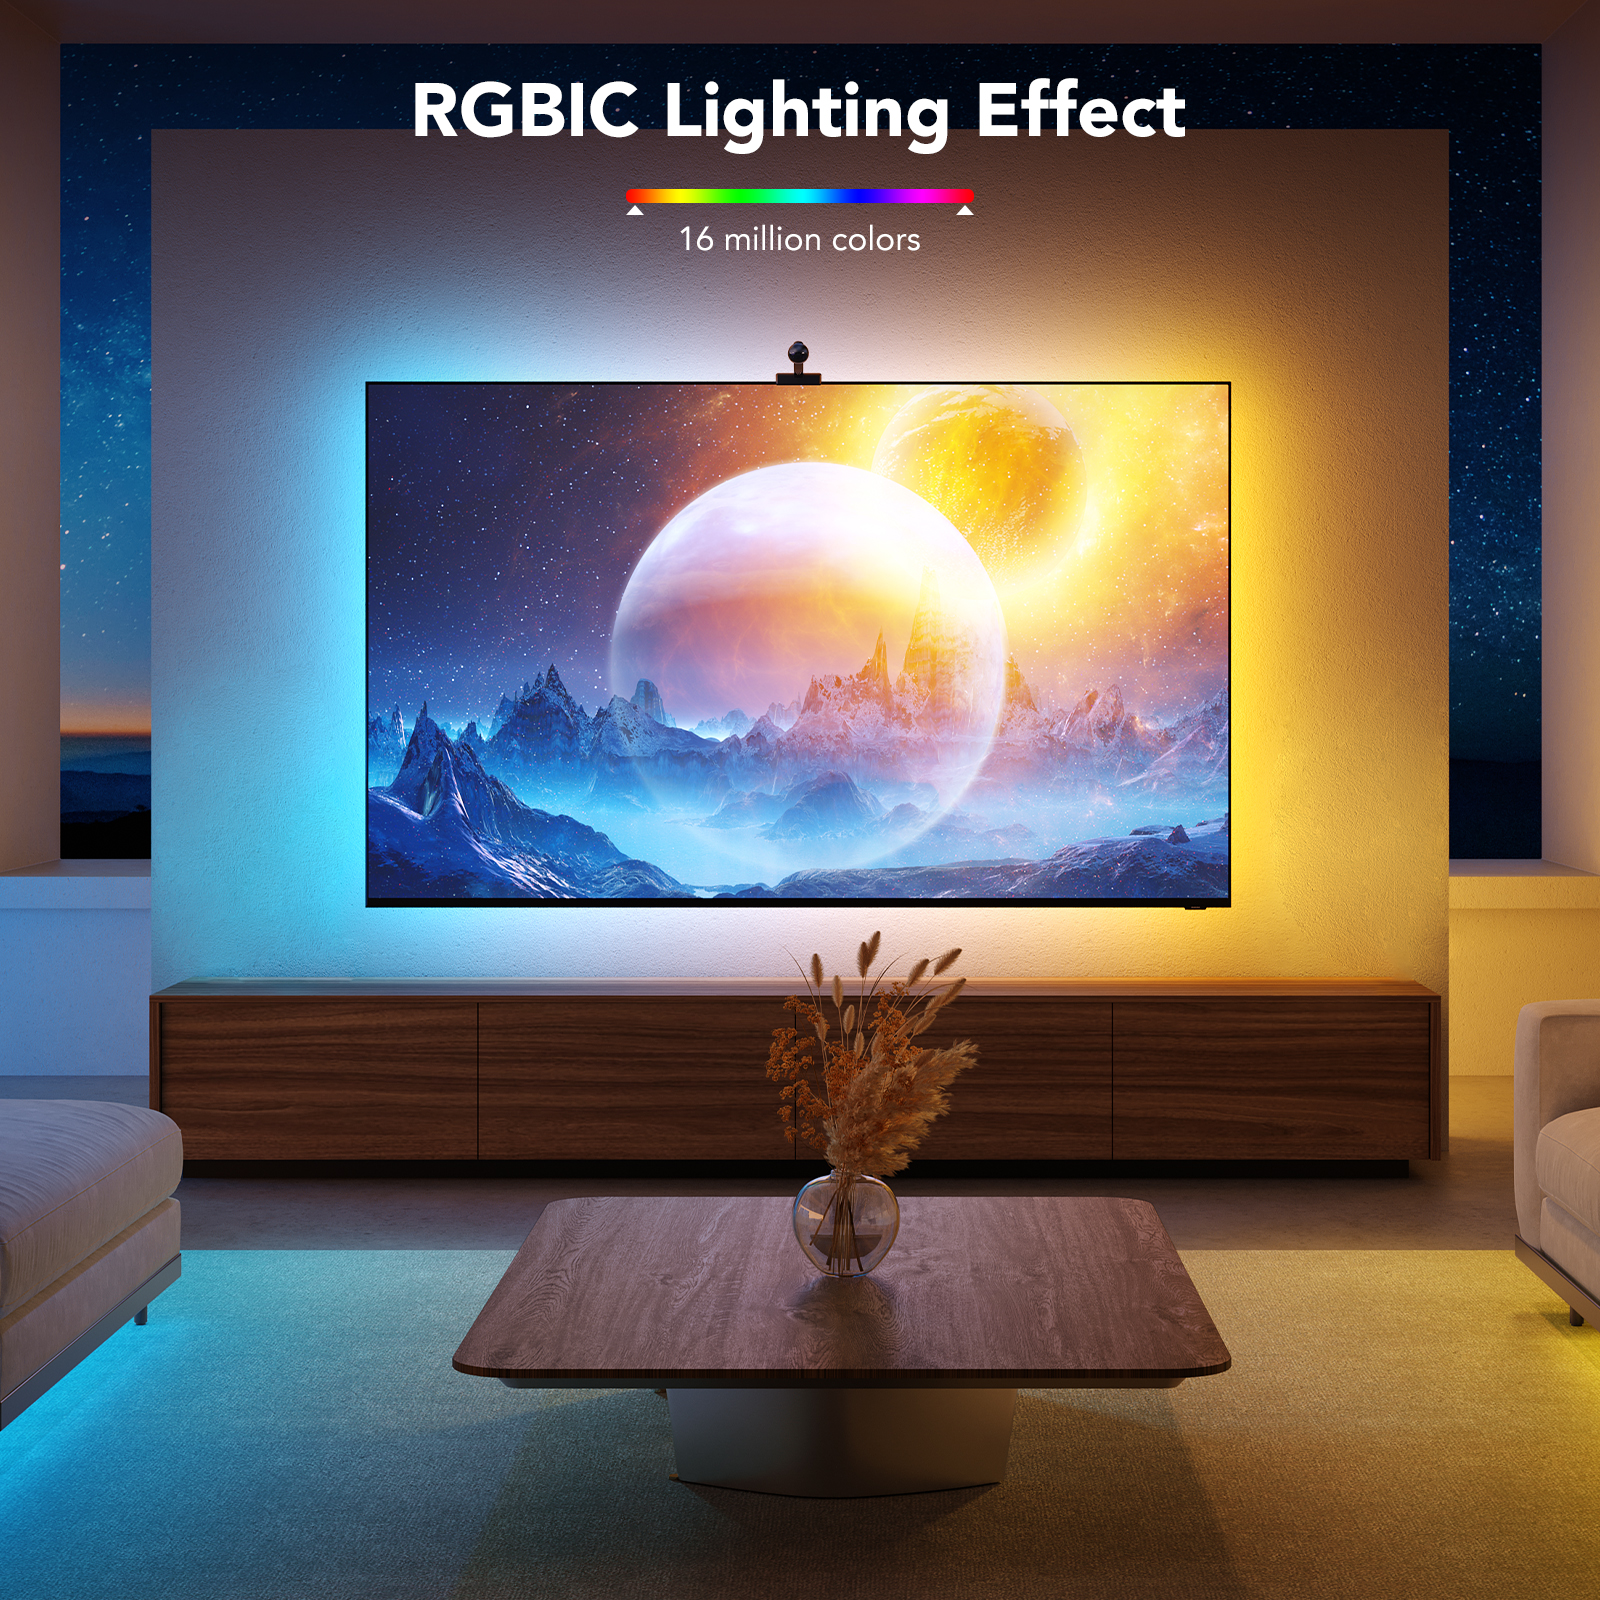 Govee Smart Wi-Fi RGBIC LED Strip Lights & Light Bars, DreamView T1 Pro for  55-65in TVs - Works with Alexa & Google Home